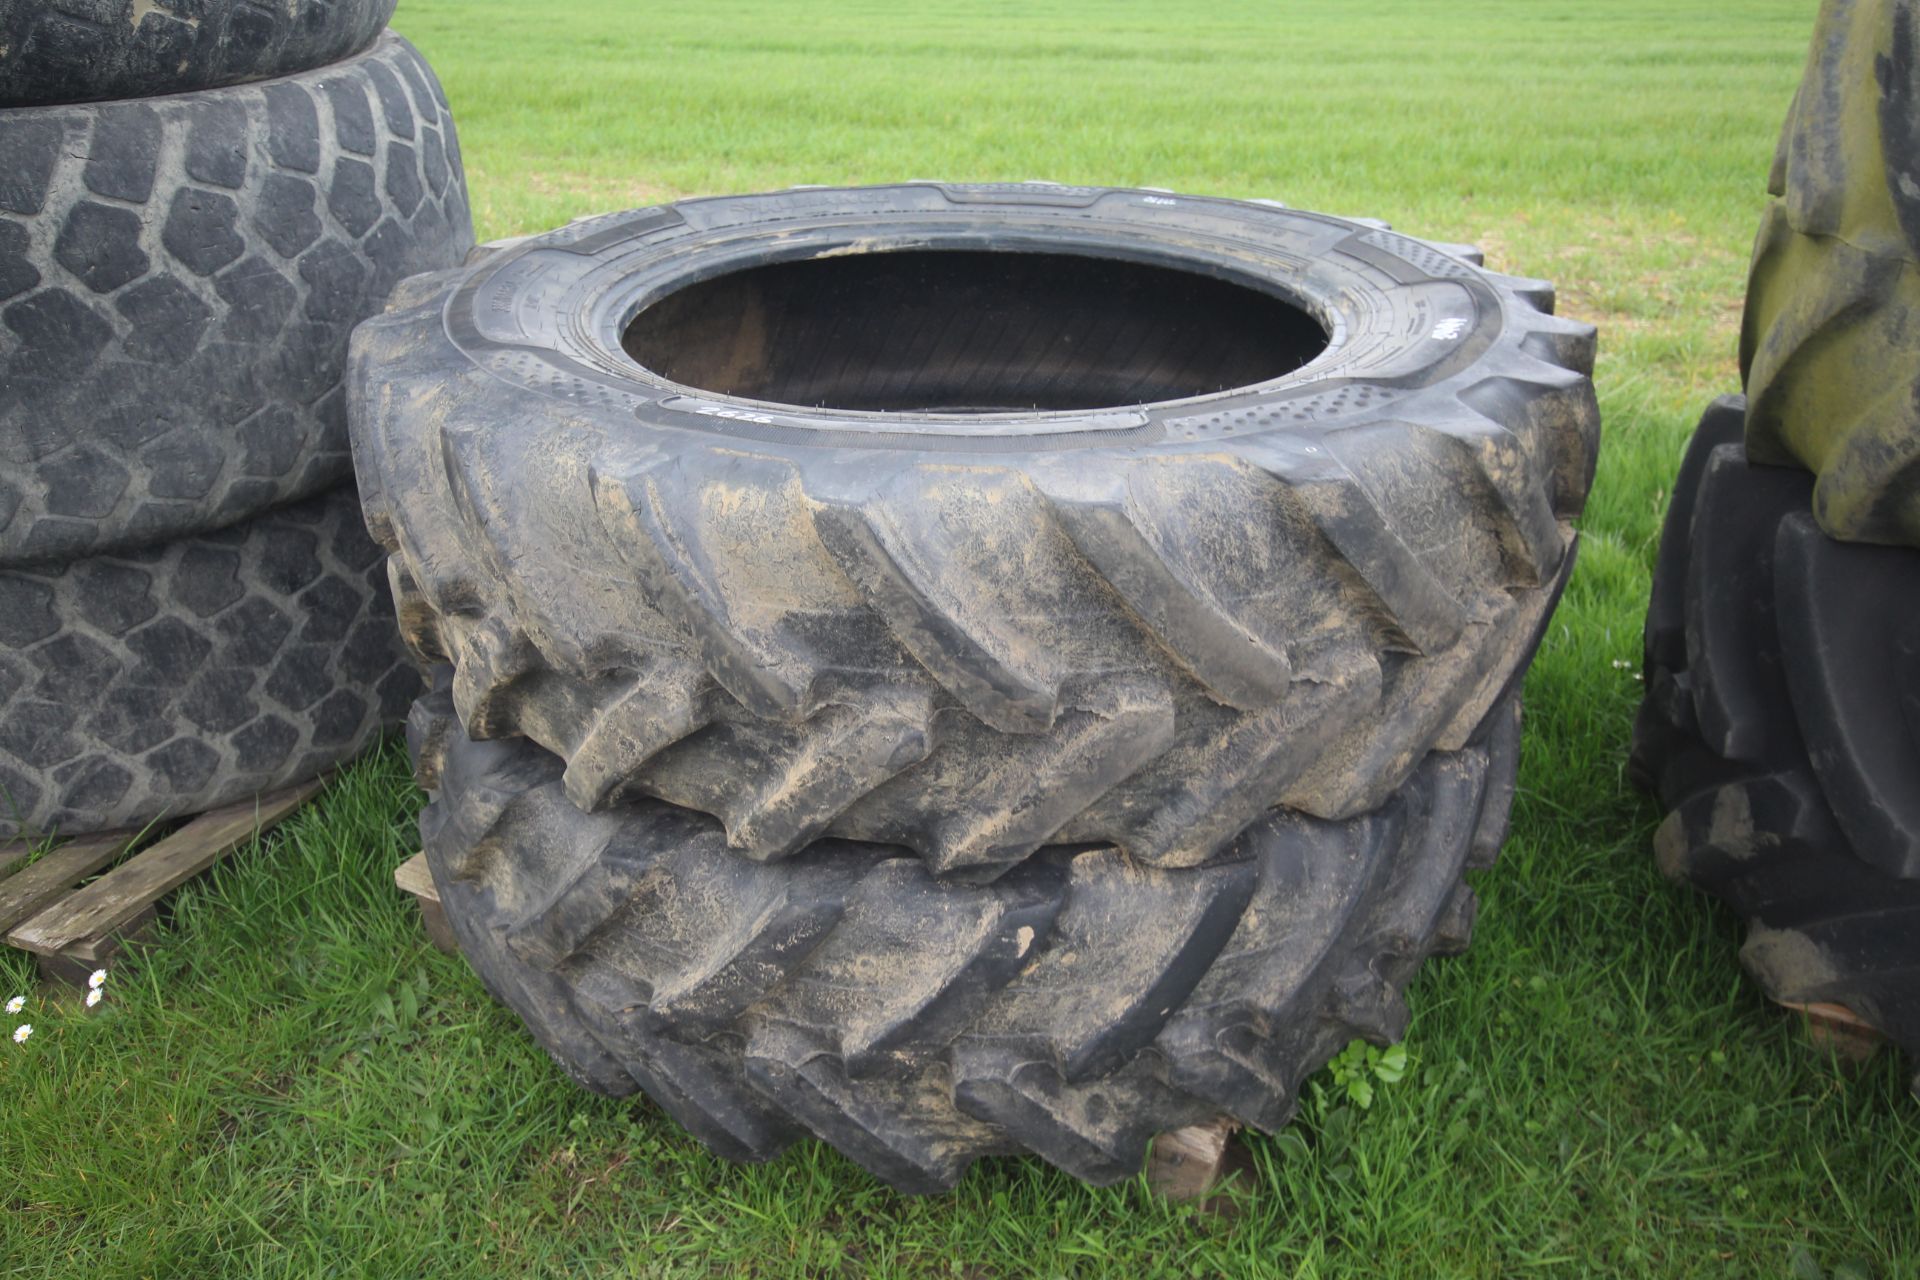 Pair of 380/85R34 tyres. V